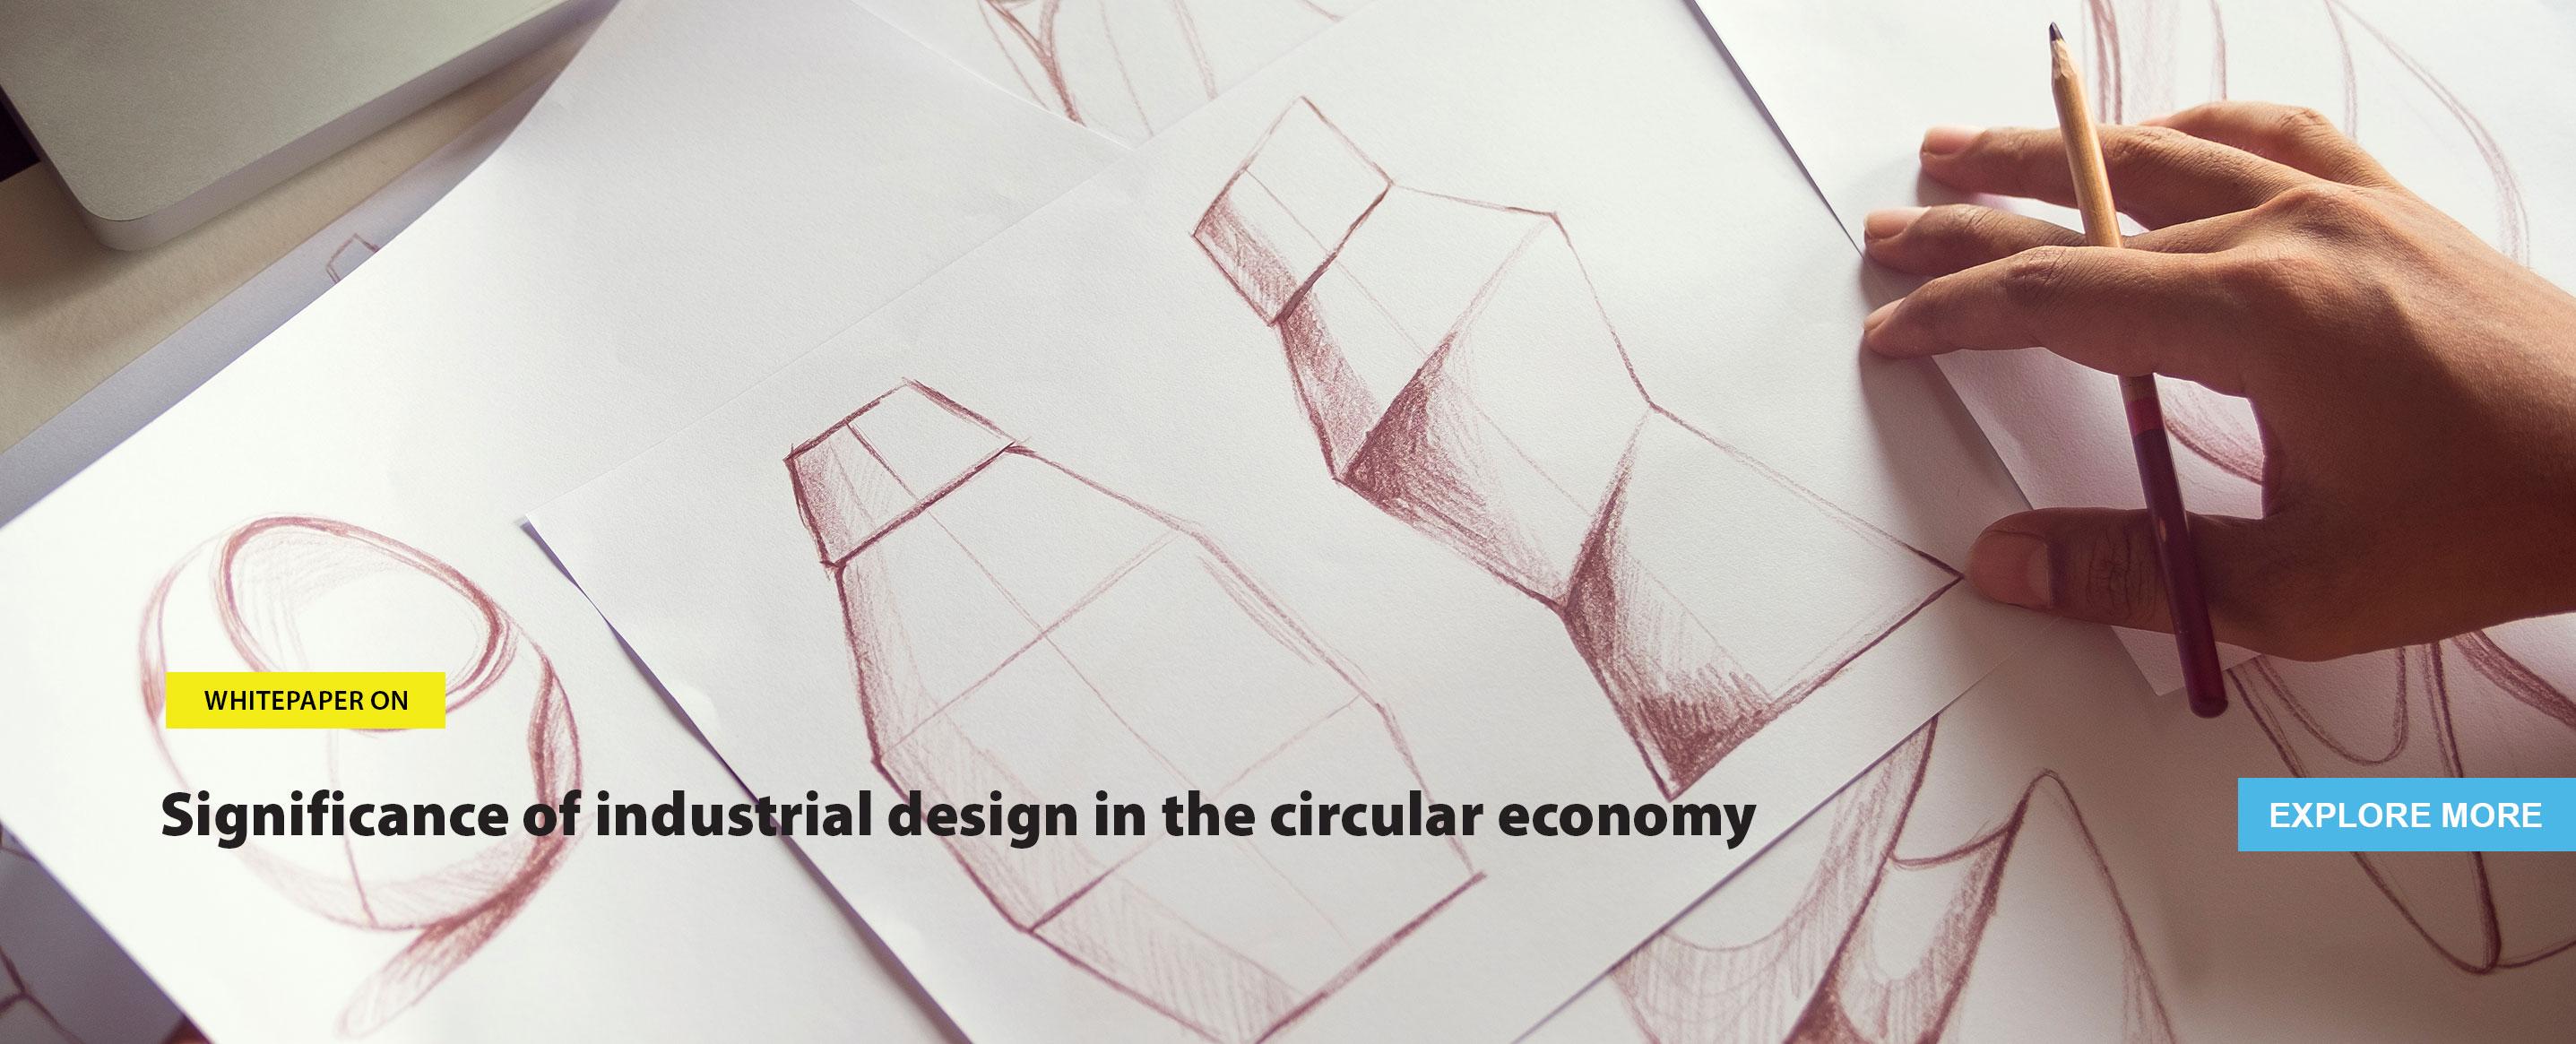 Significance of industrial design in the circular economy